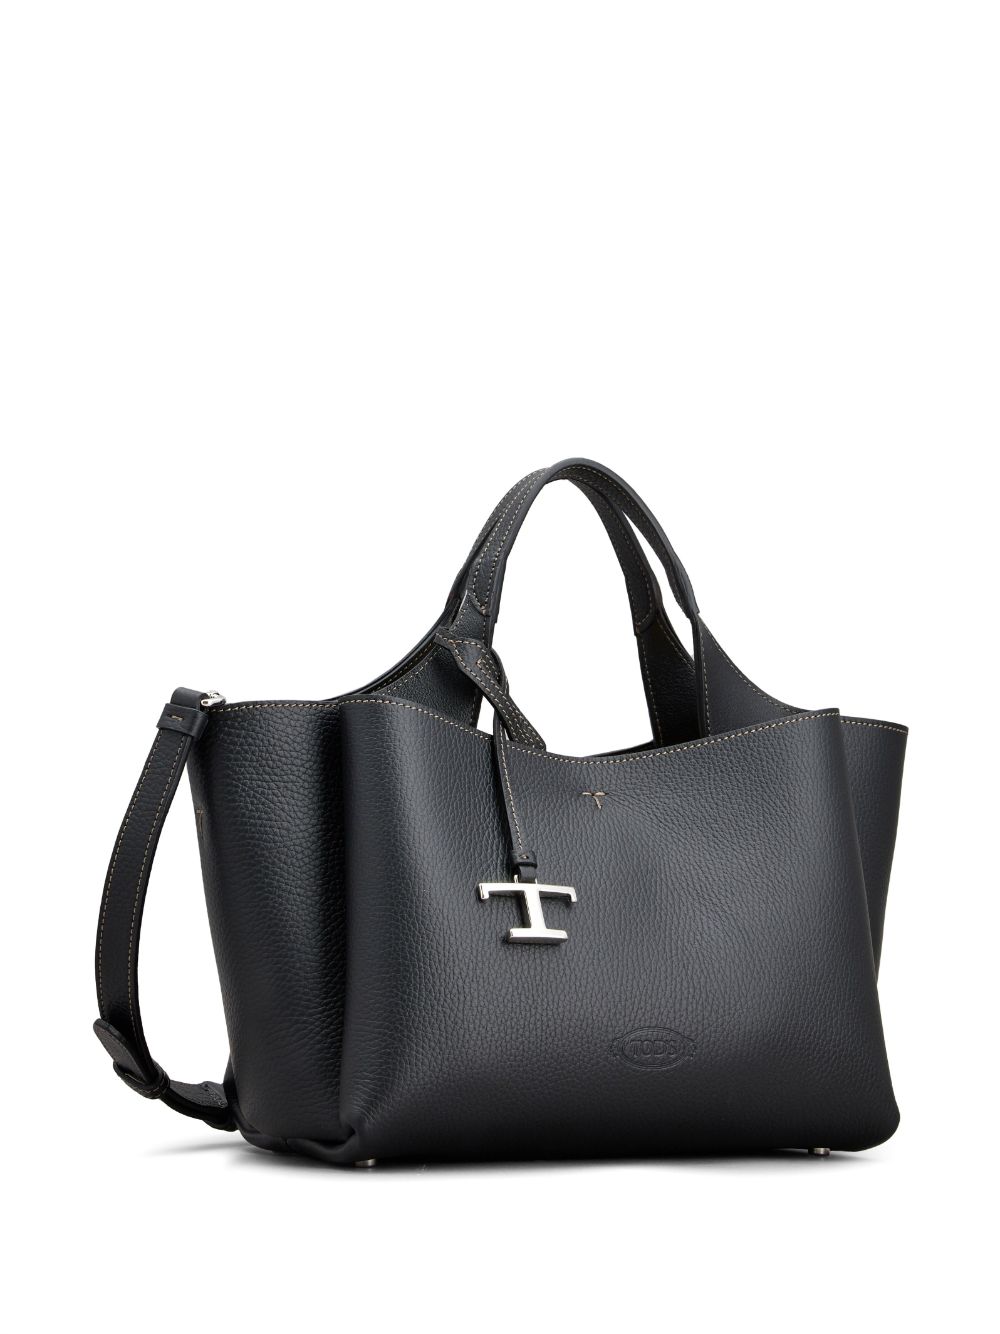 Tod's TOD'S- T Timeless Mini Leather Tote Bag